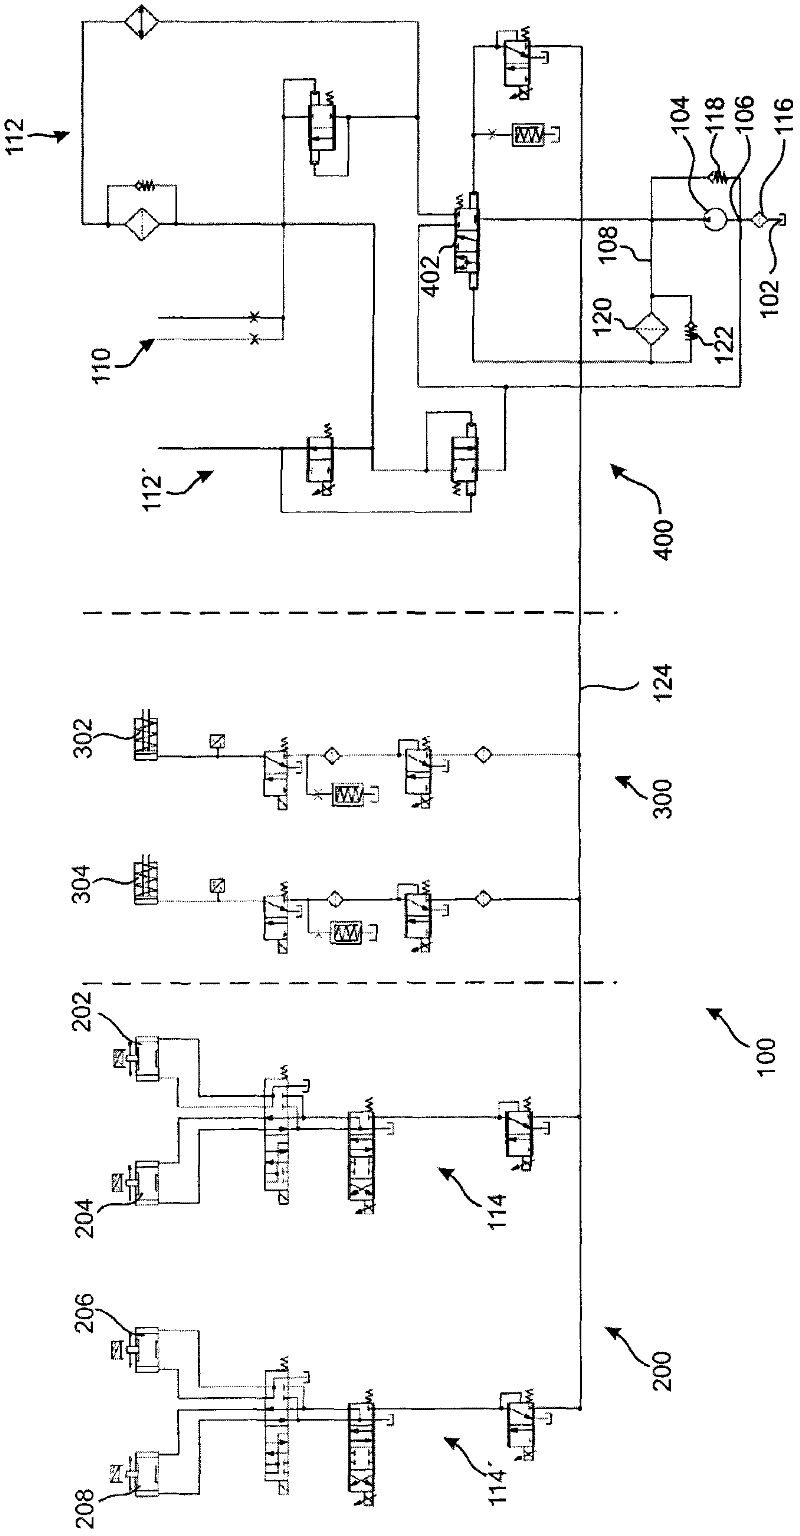 Transmission hydraulic system for a transmission with multiple clutches, control method and hydraulic valve thereof